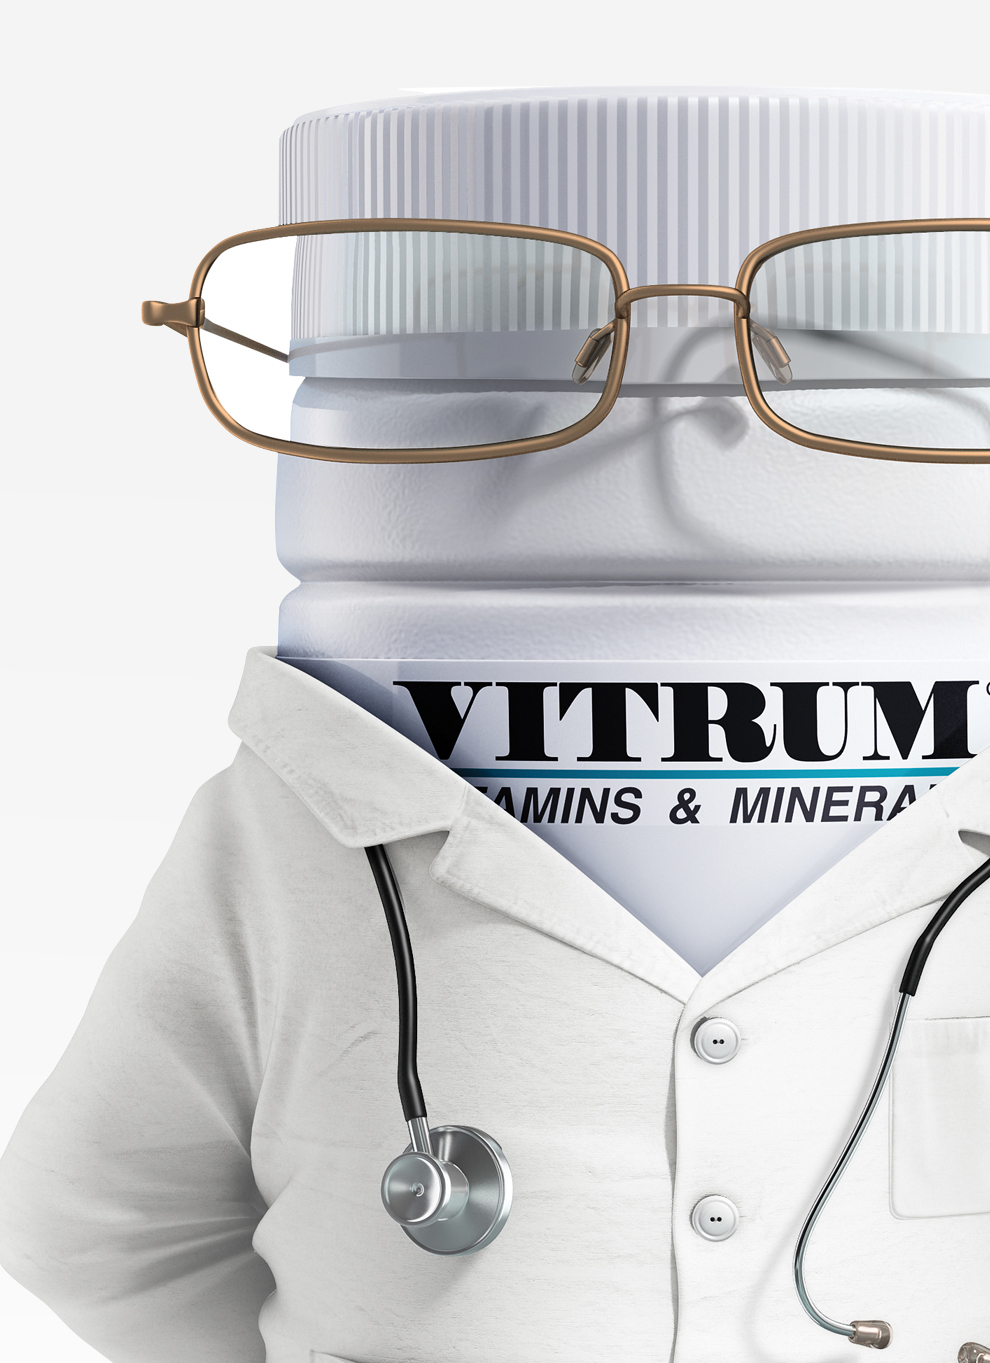 print vitrum vitamin mineral pharm Unipharm medicine key visual 3D computer graphics modeling Character Andrey Maltsev Russia Moscow